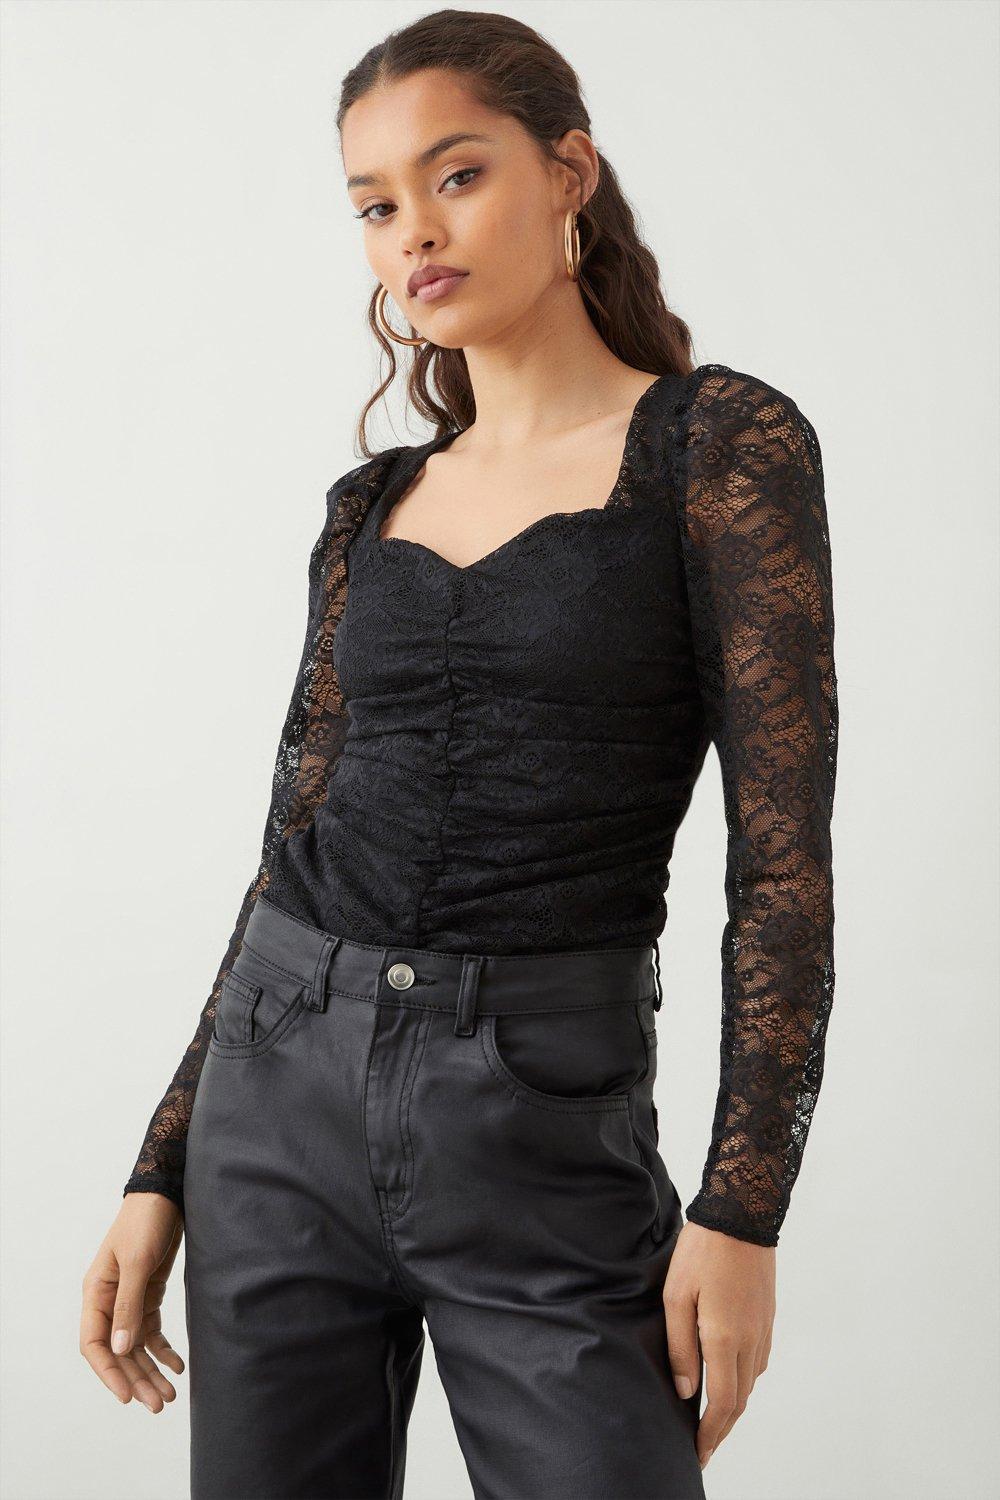 Women’s Petite Sweetheart Lace Ruched Top - black - S